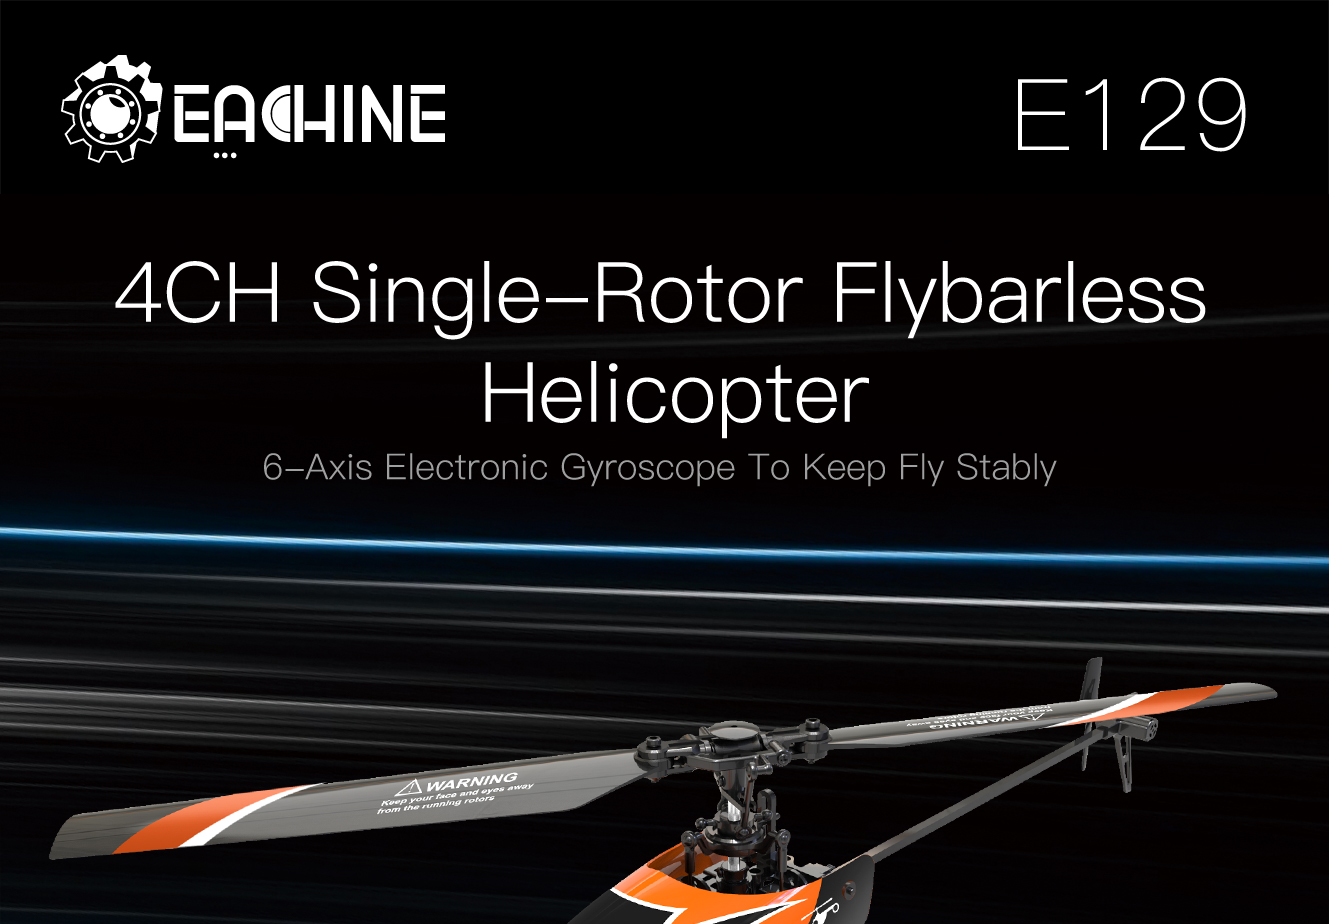 Eachine-E129-24G-4CH-6-Axis-Gyro-Altitude-Hold-Flybarless-RC-Helicopter-RTF-1738482-1